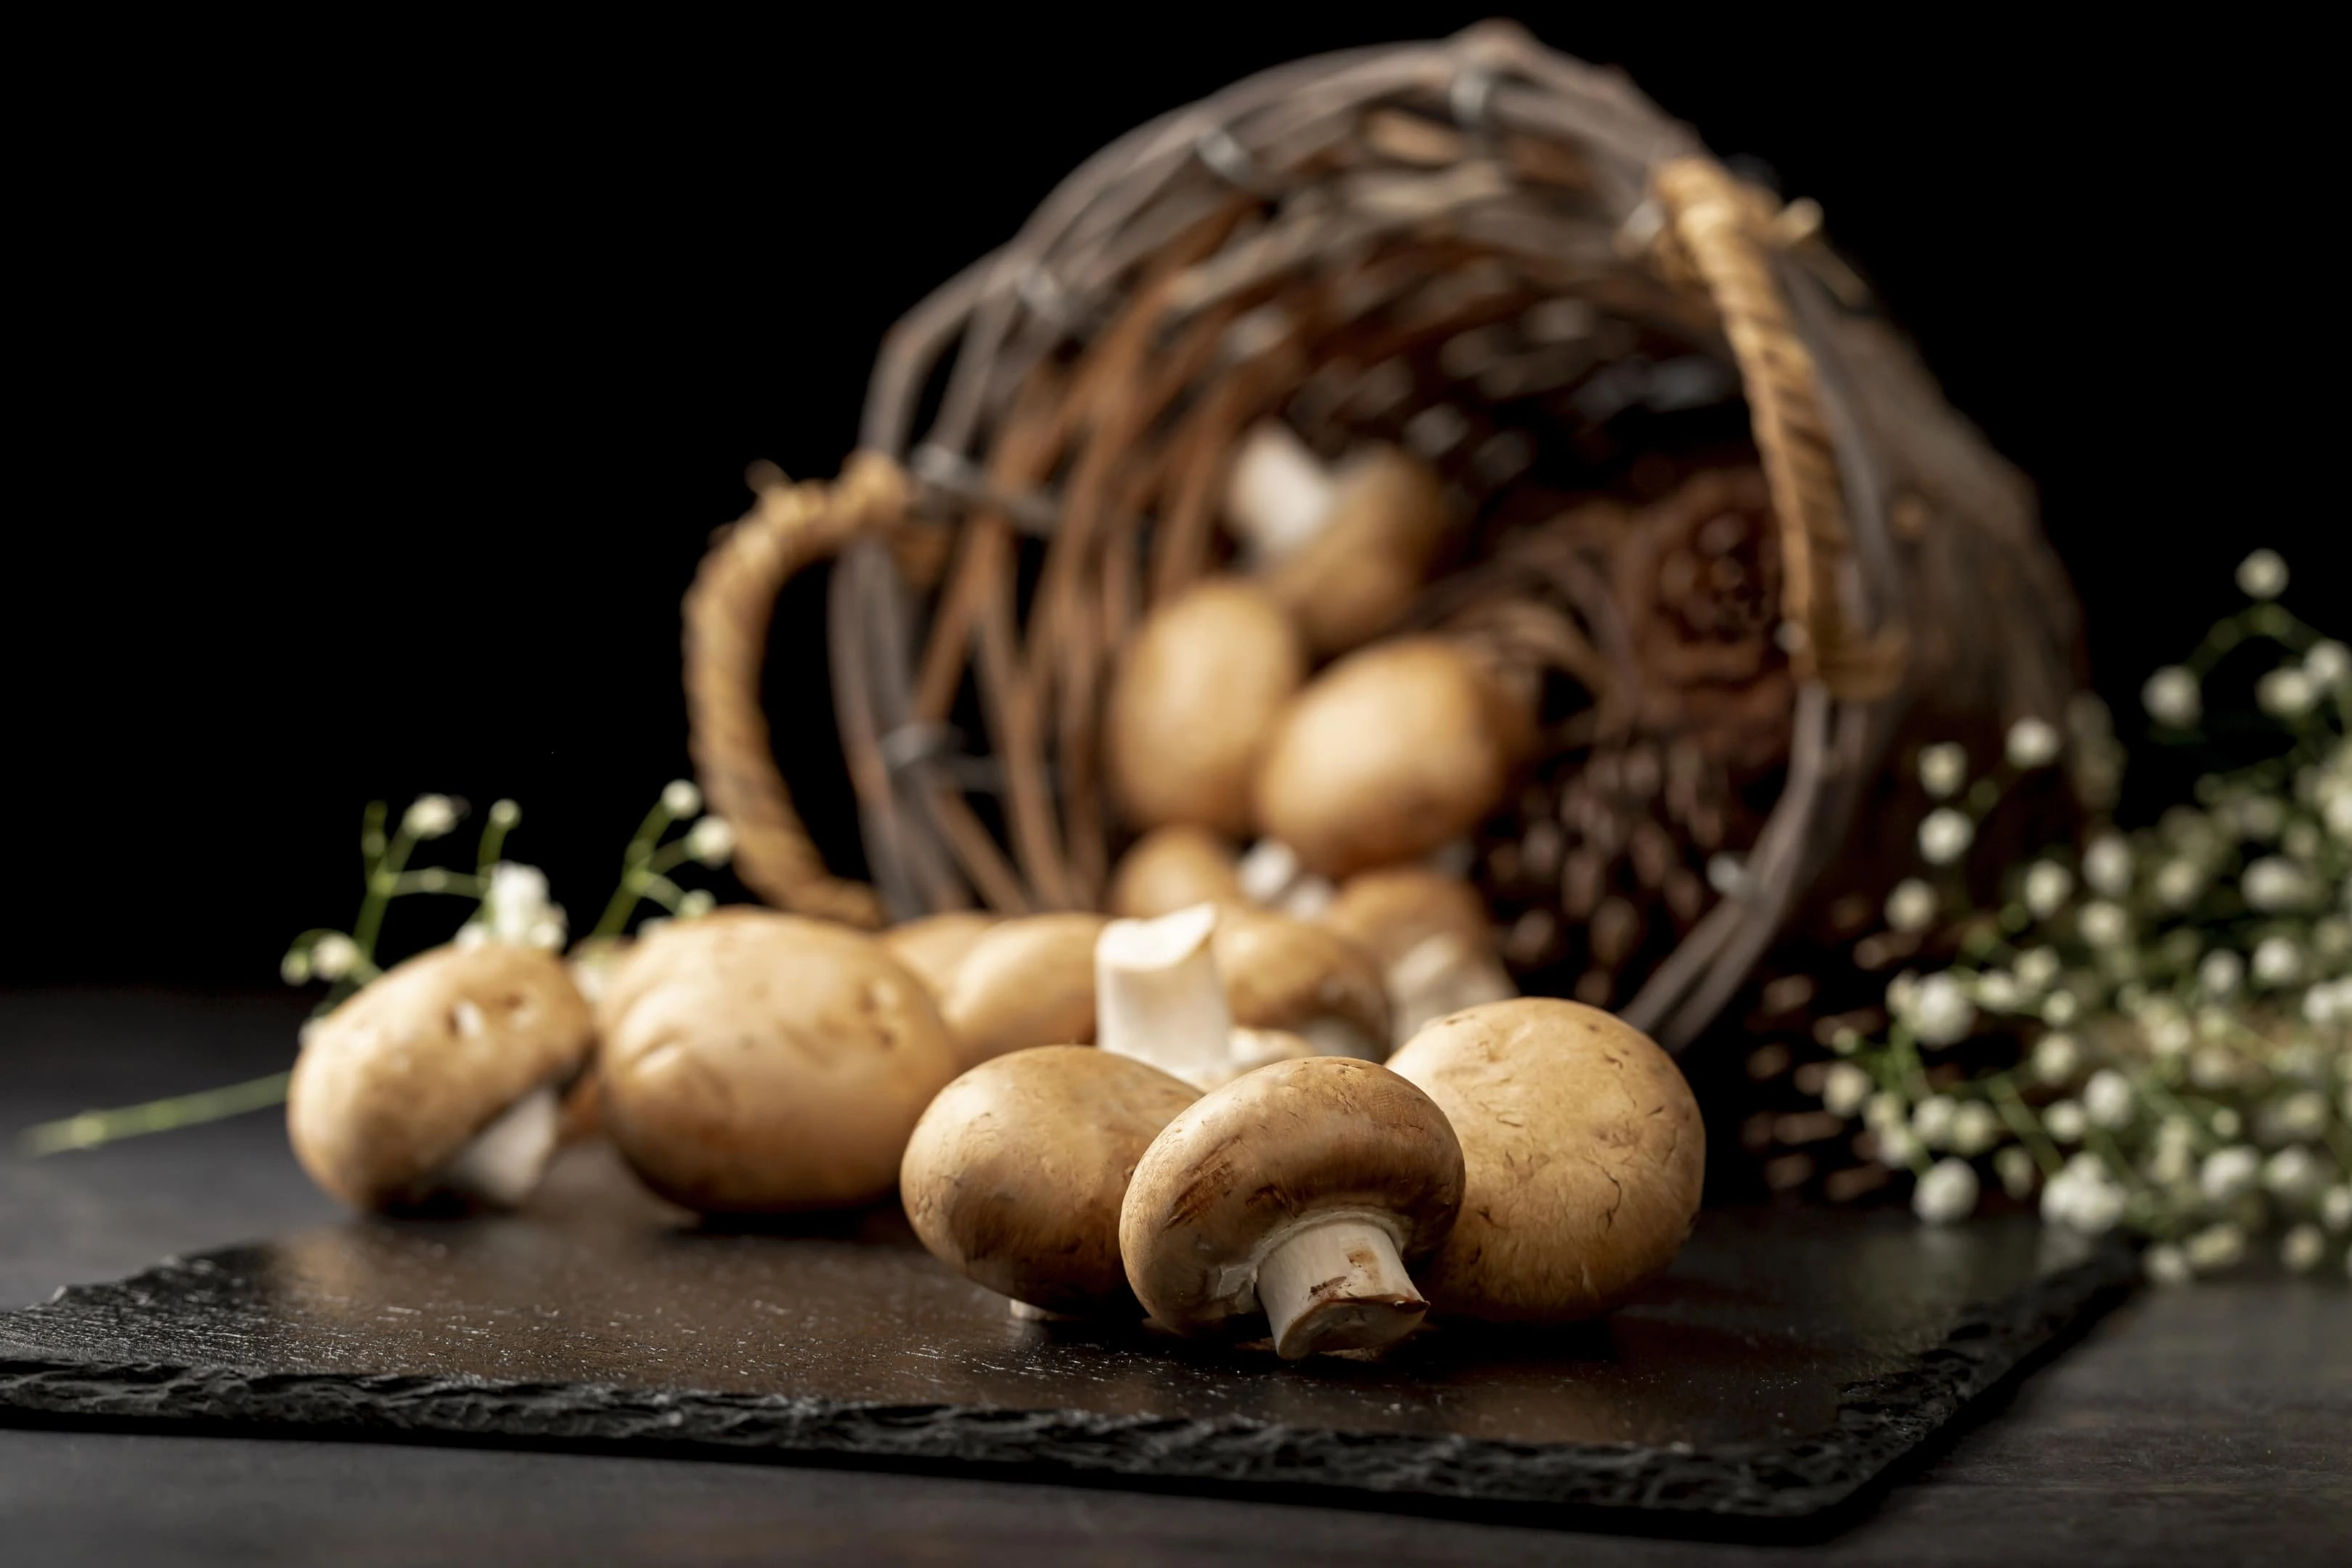 Mushrooms on black stone plate with brown knitted basket